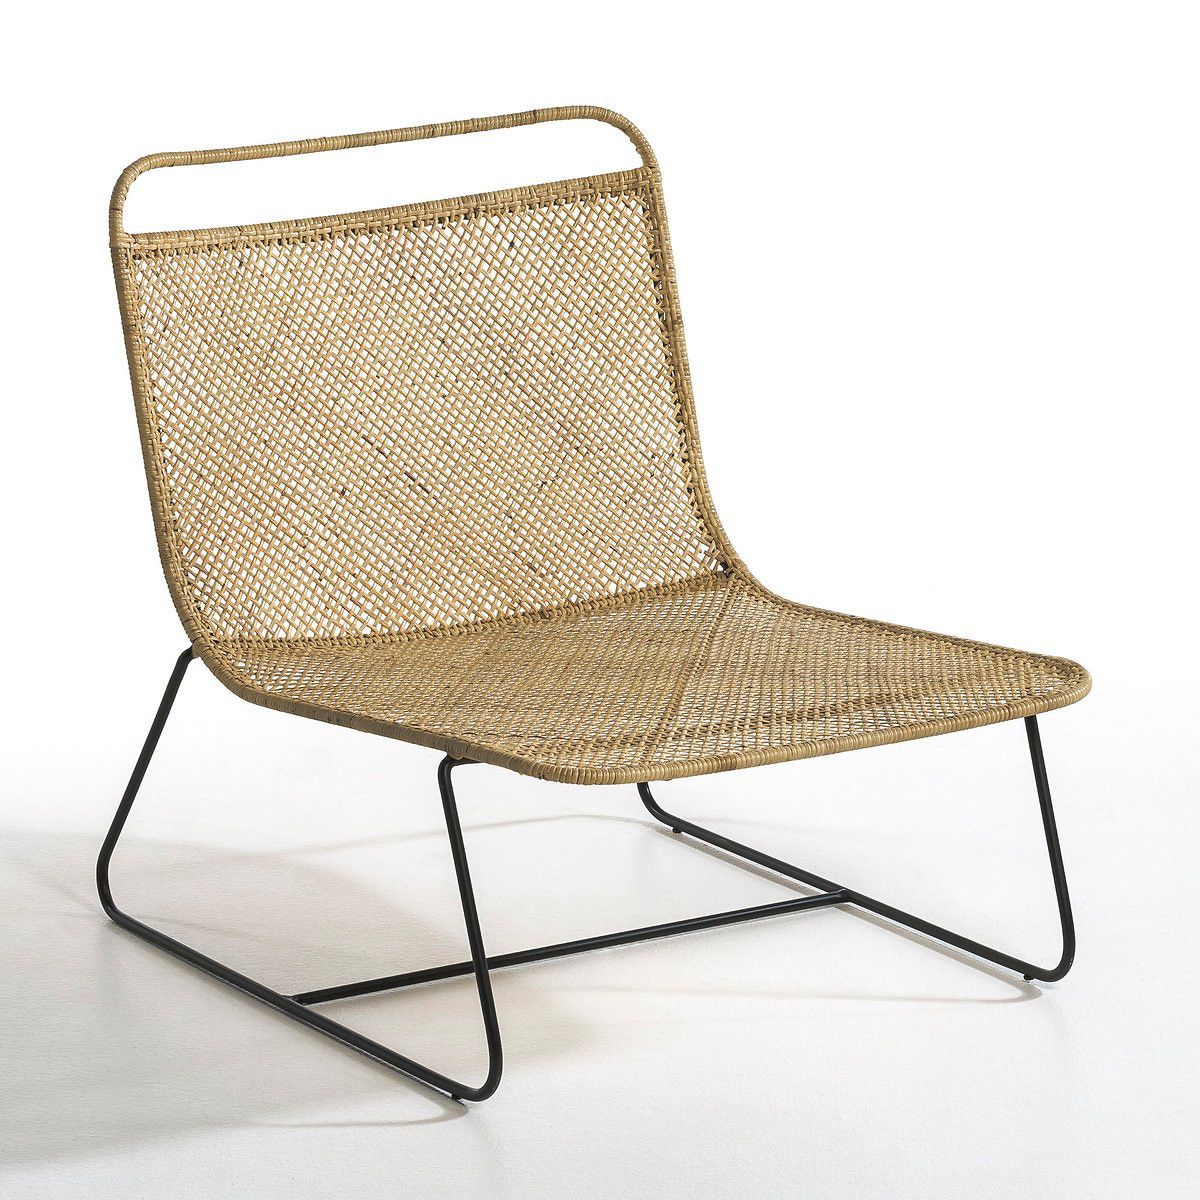 Theophane Braided Lounge Chair, by E. Gallina. | La Redoute (UK)